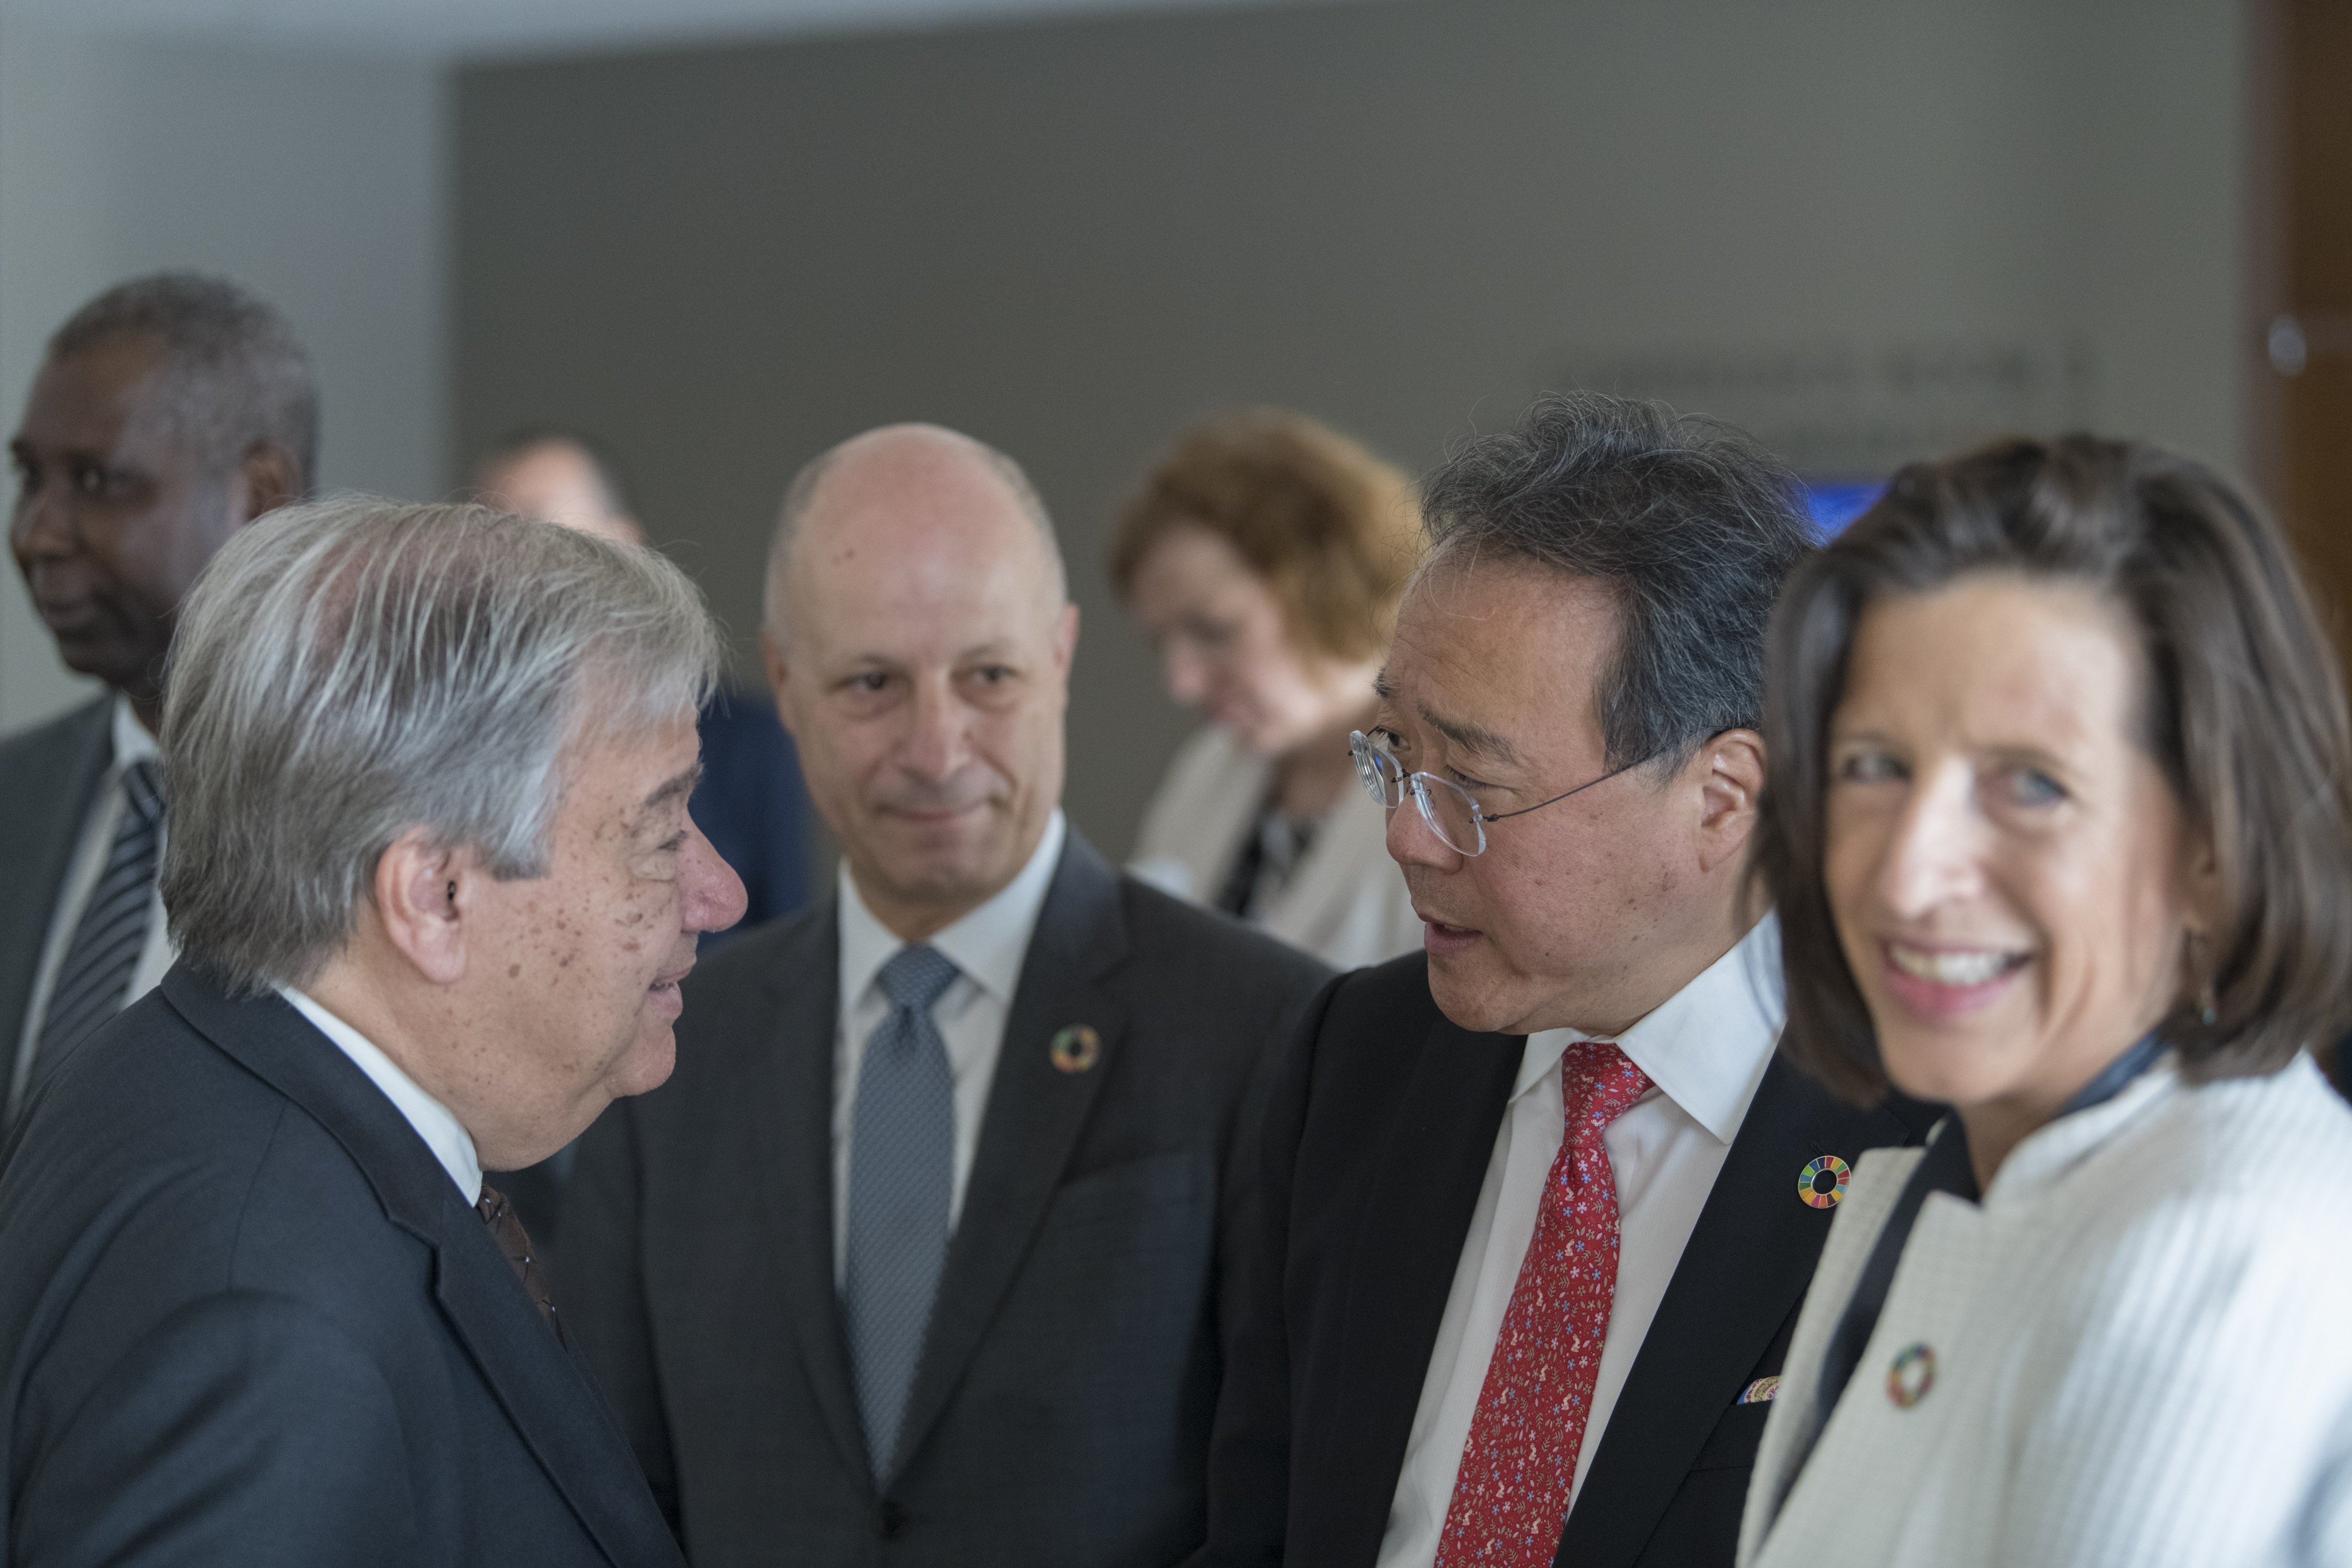 Secretary-General António Guterres speaks with Yo-Yo Ma, UN Messenger of Peace, at the Peace Bell ceremony in observance of the International Day of Peace (21 September). 20 Sept 2019. 51Թ, New York/UN Photo/Mark Garten